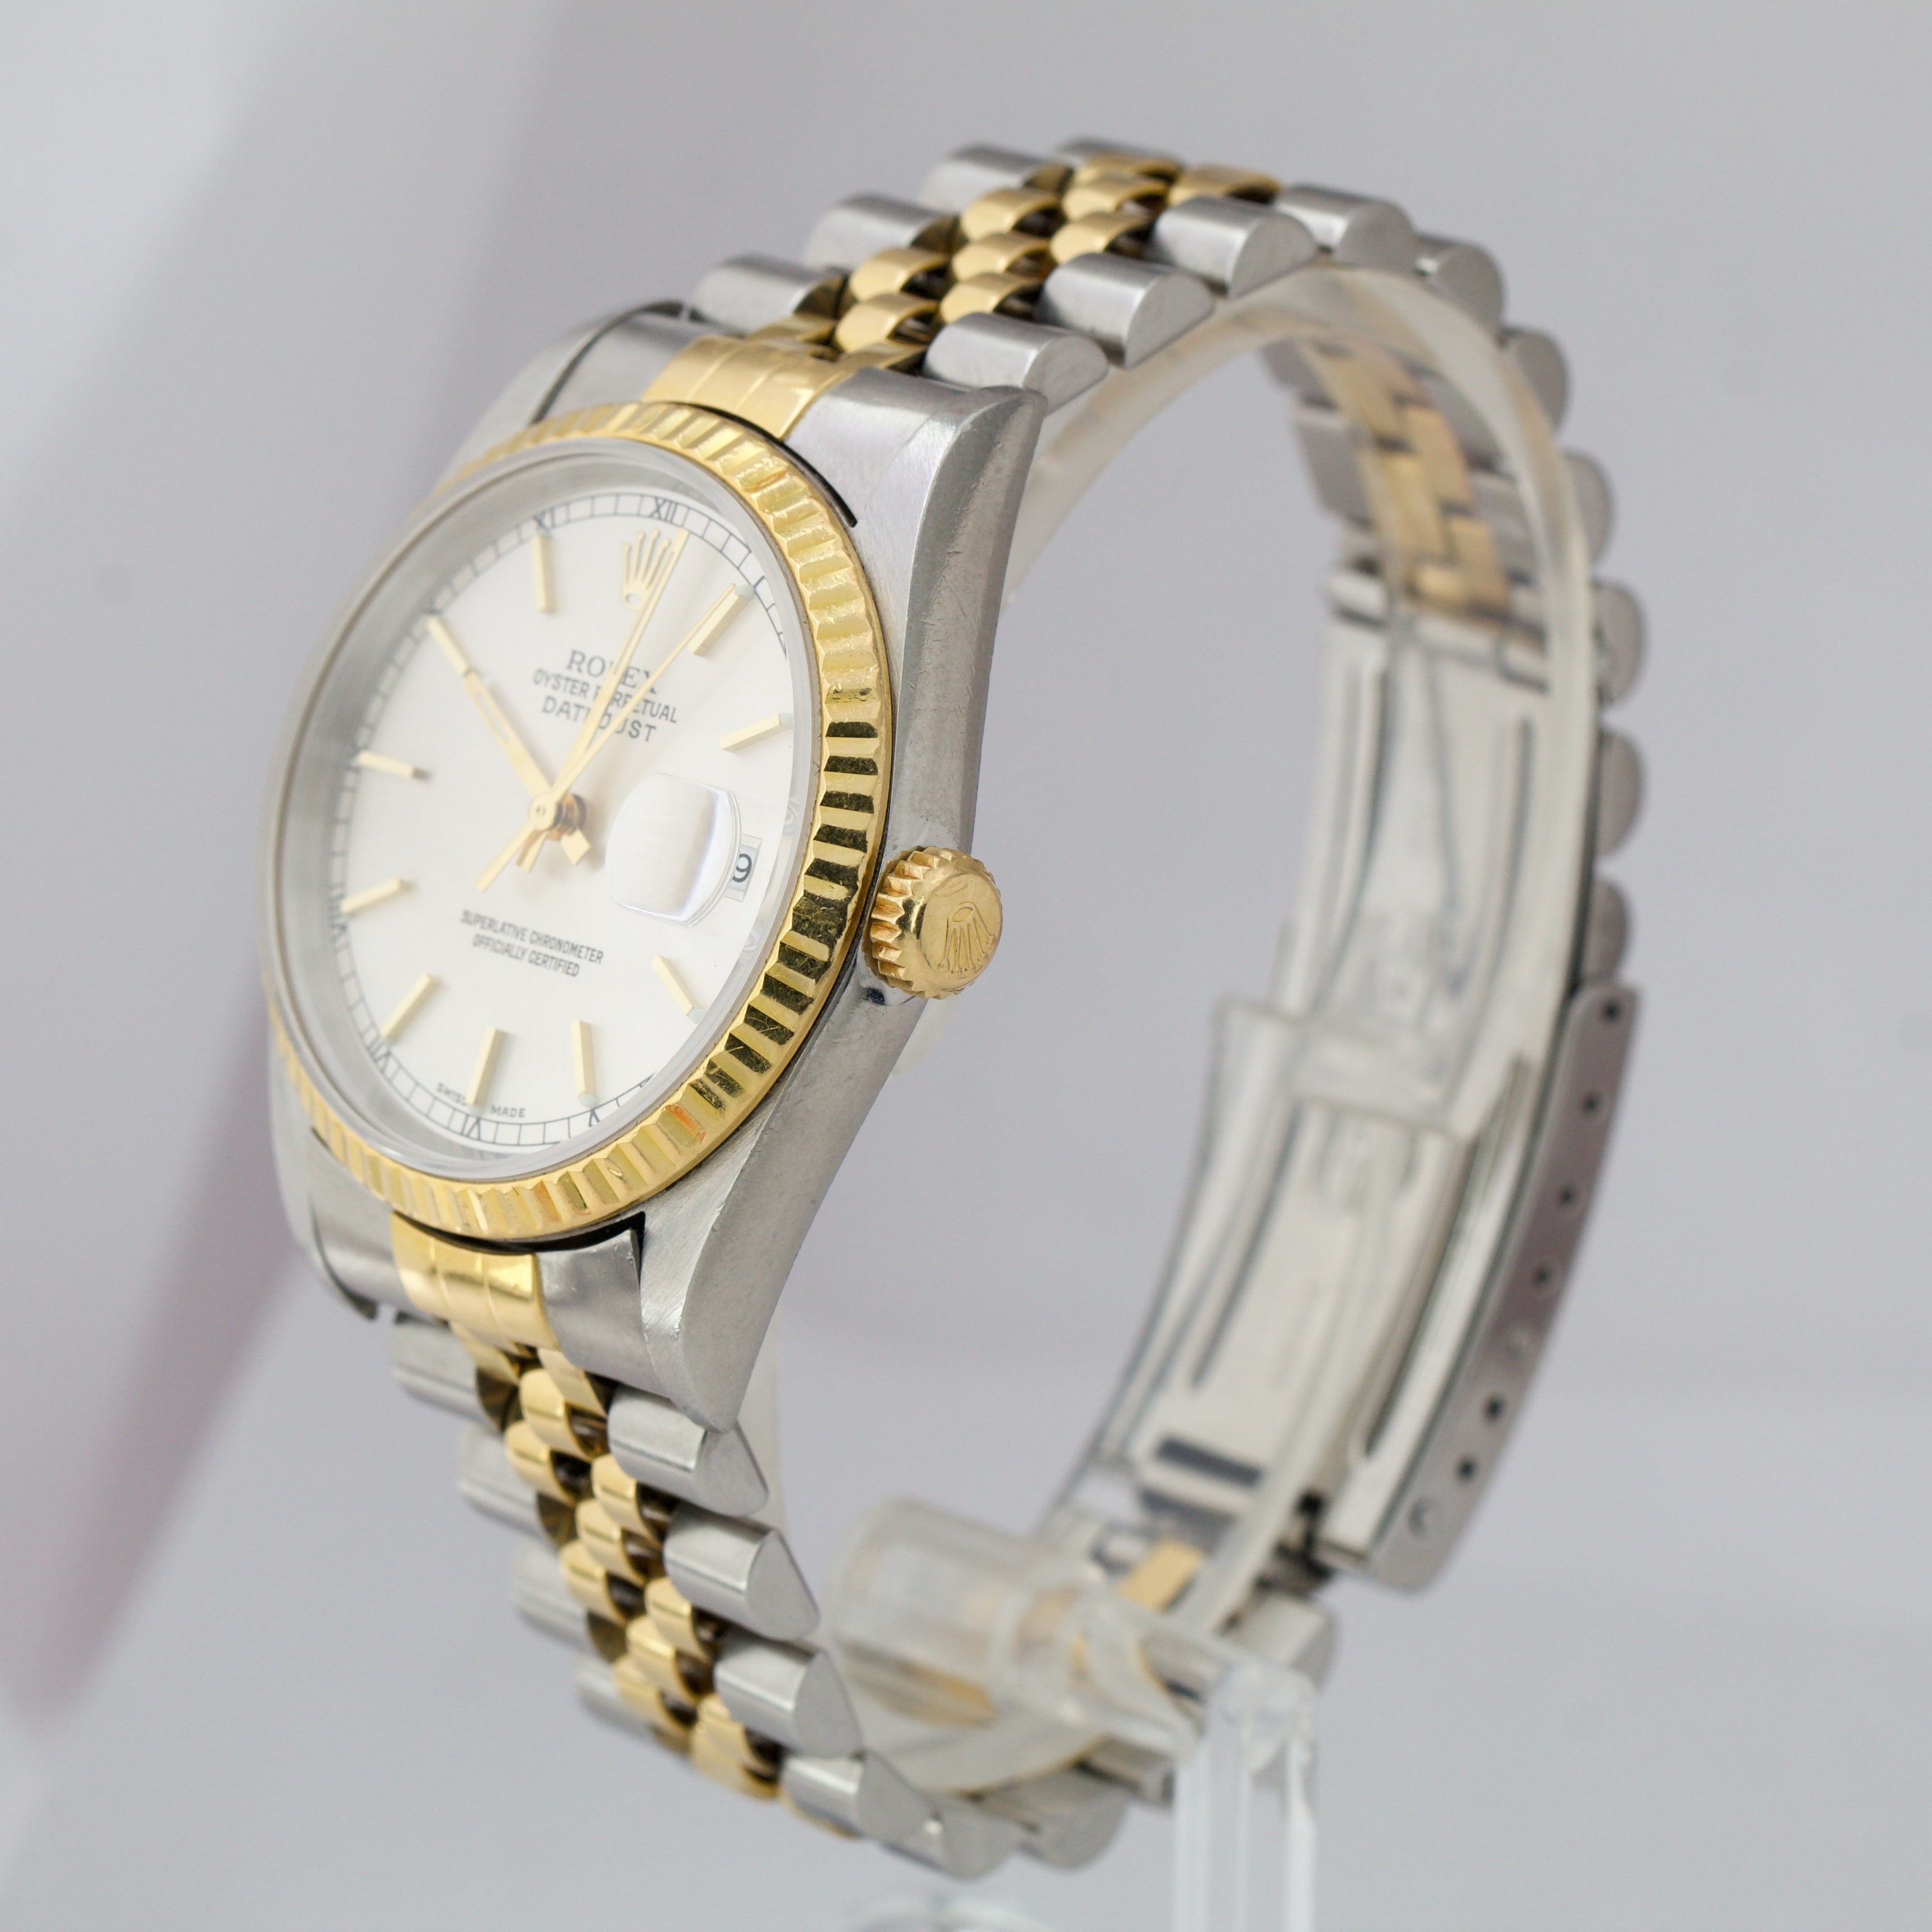 Rolex Datejust 36 mm Two Tone Jubilee Silver Dial 16233